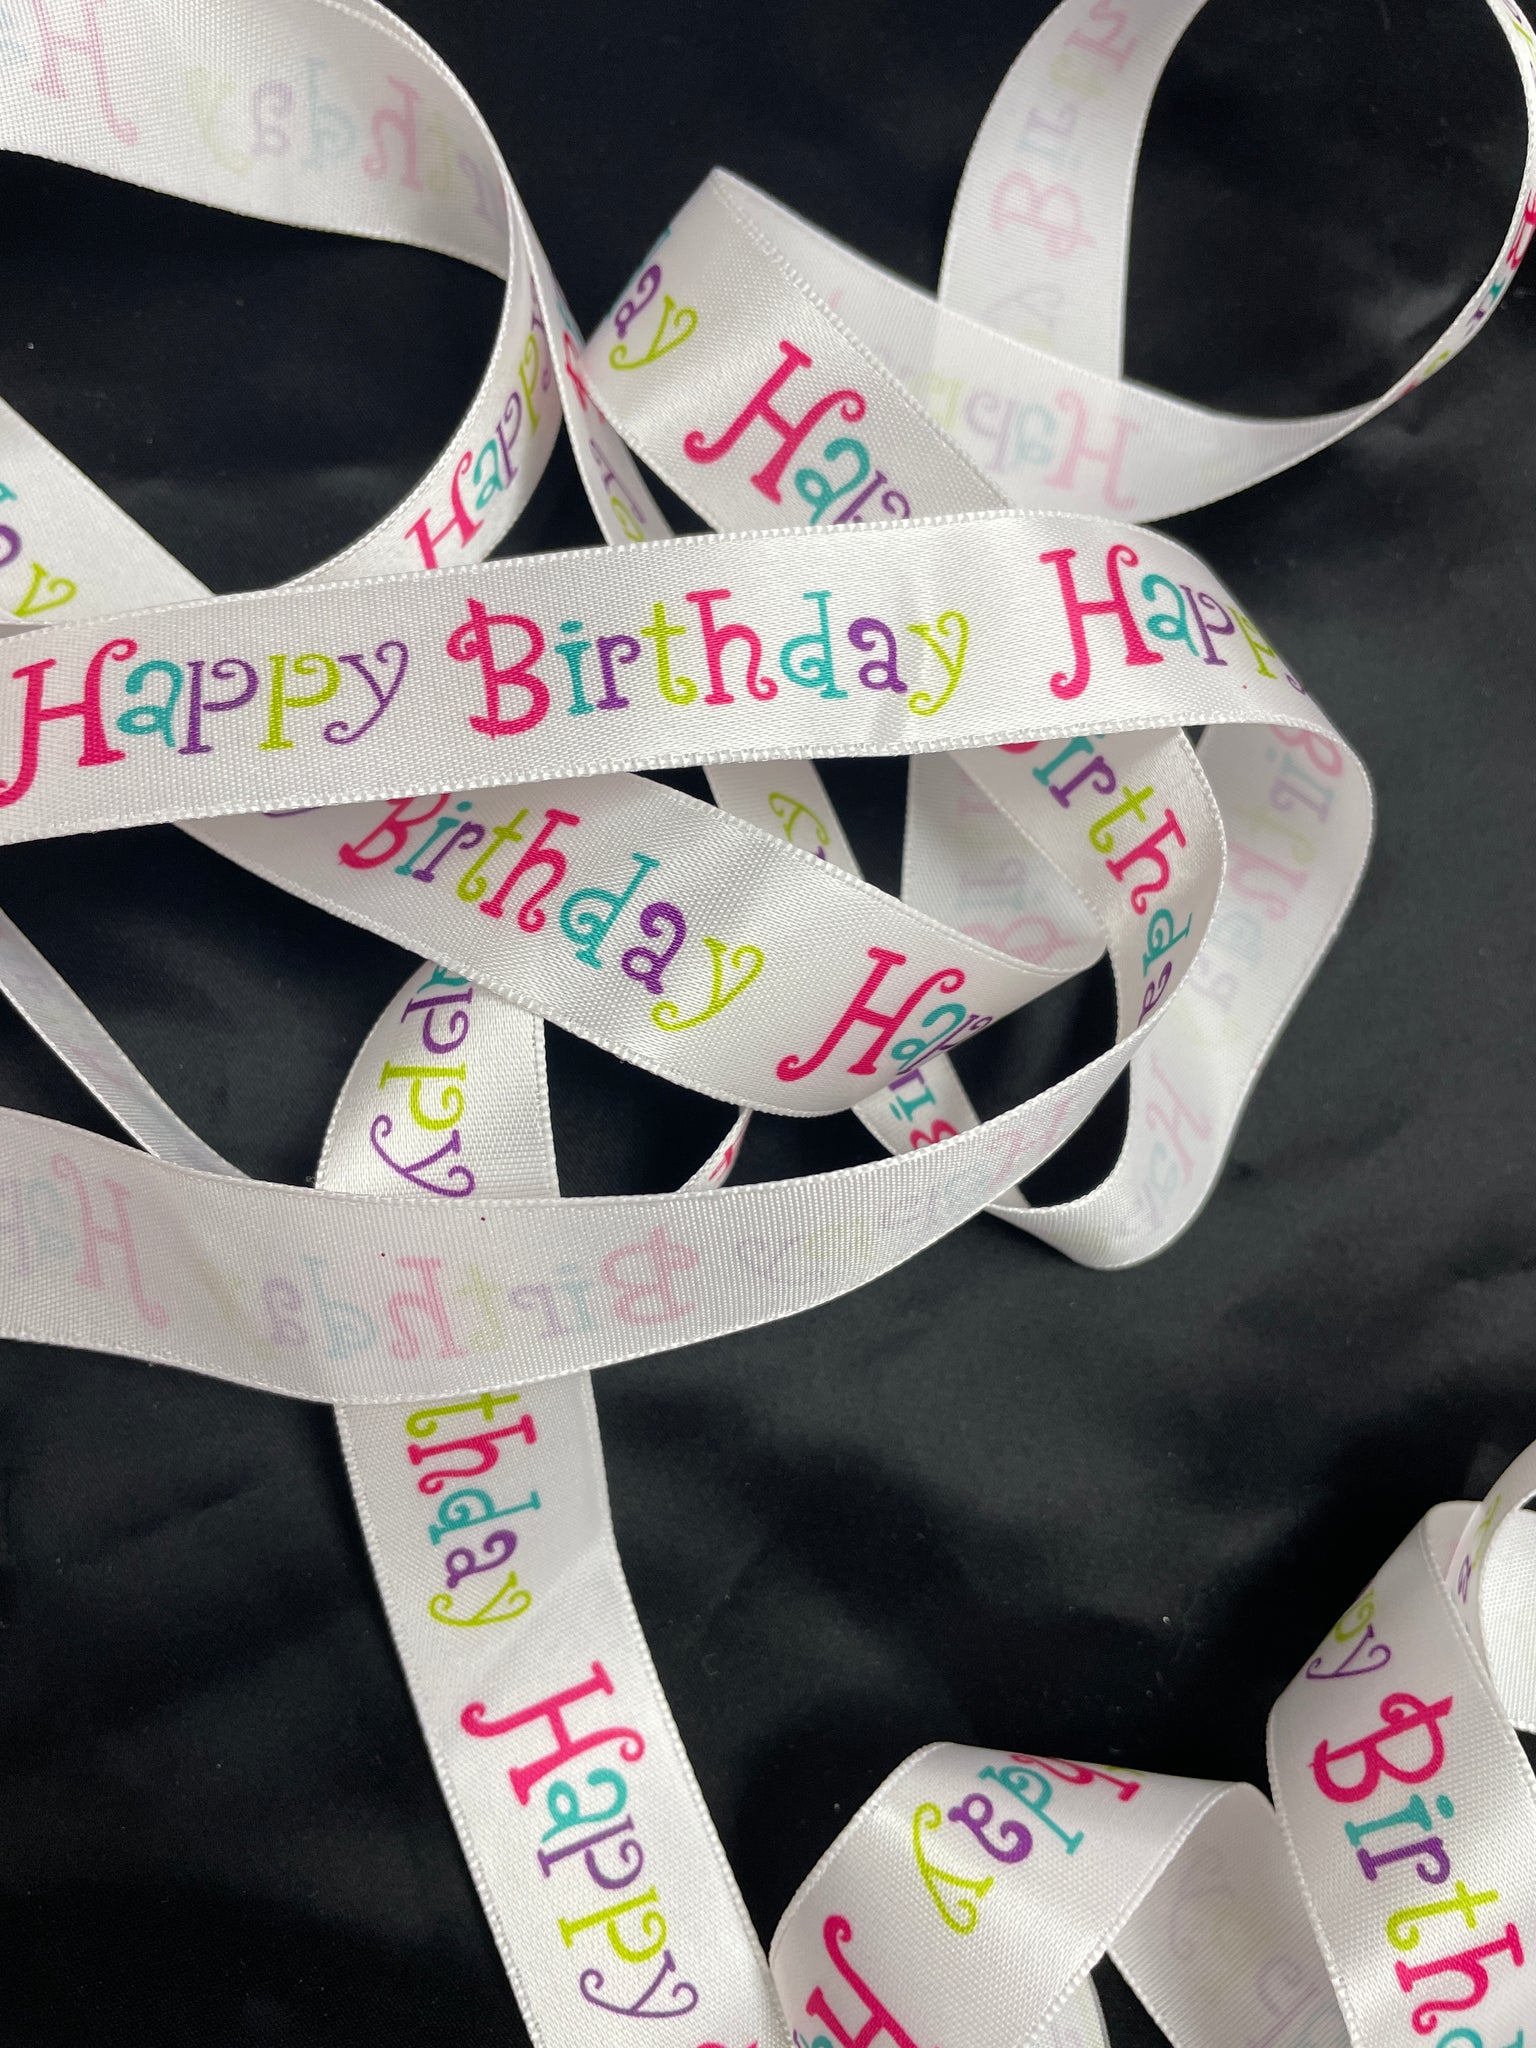 3 YD Polyester Printed Satin Ribbon - White with Multicolored "Happy Birthday"